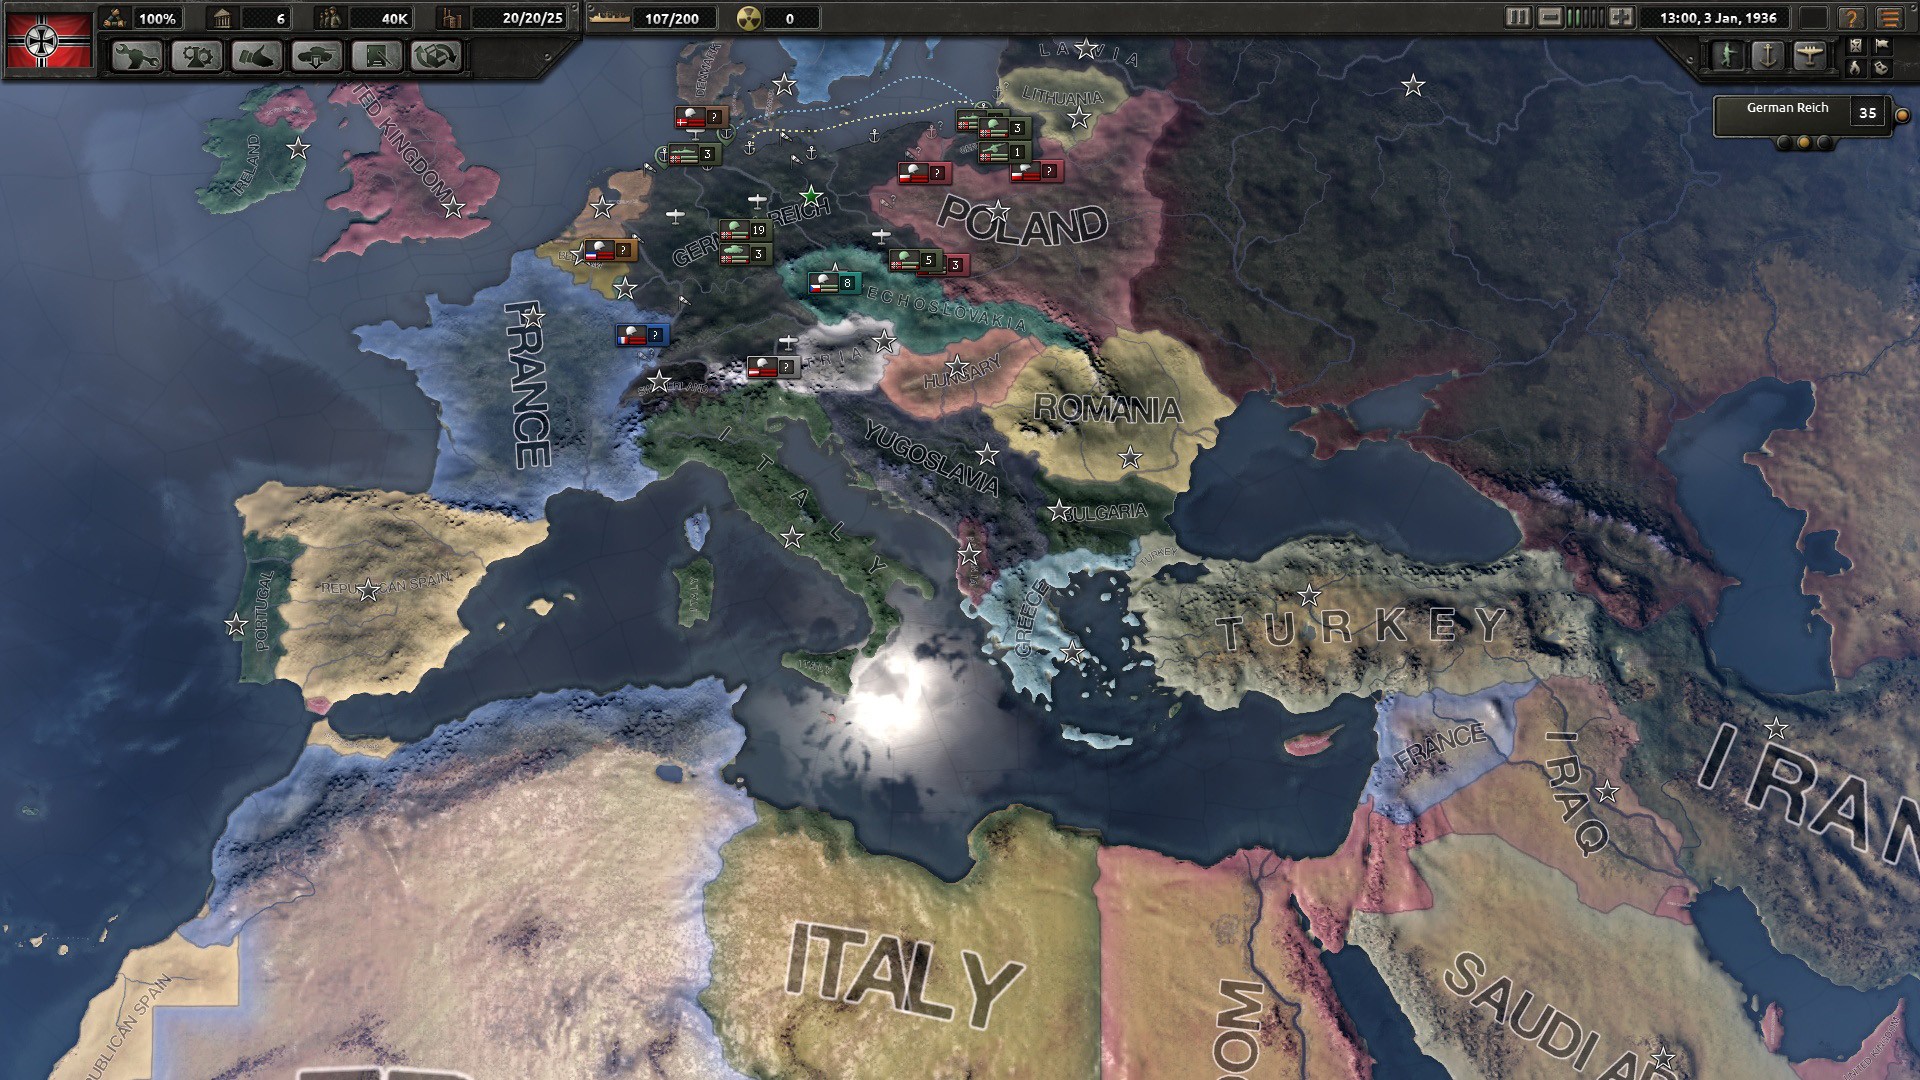 hearts of iron 5 release date